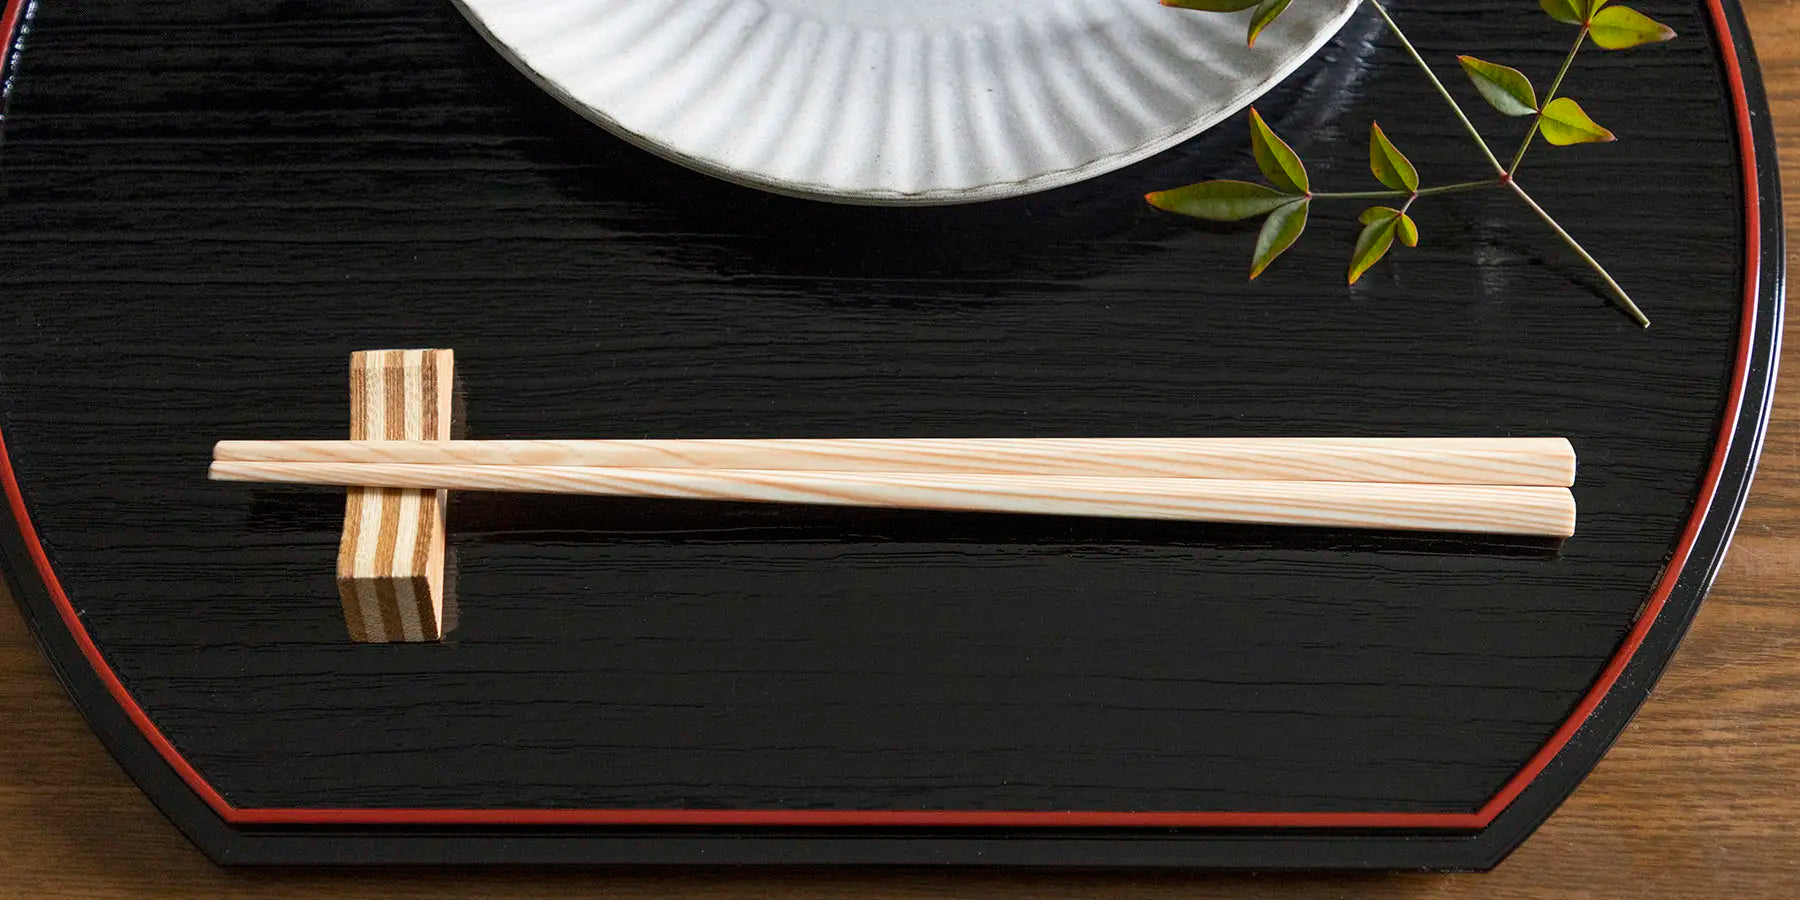 Discover our great selection of Chopsticks at Globalkitchen Japan.